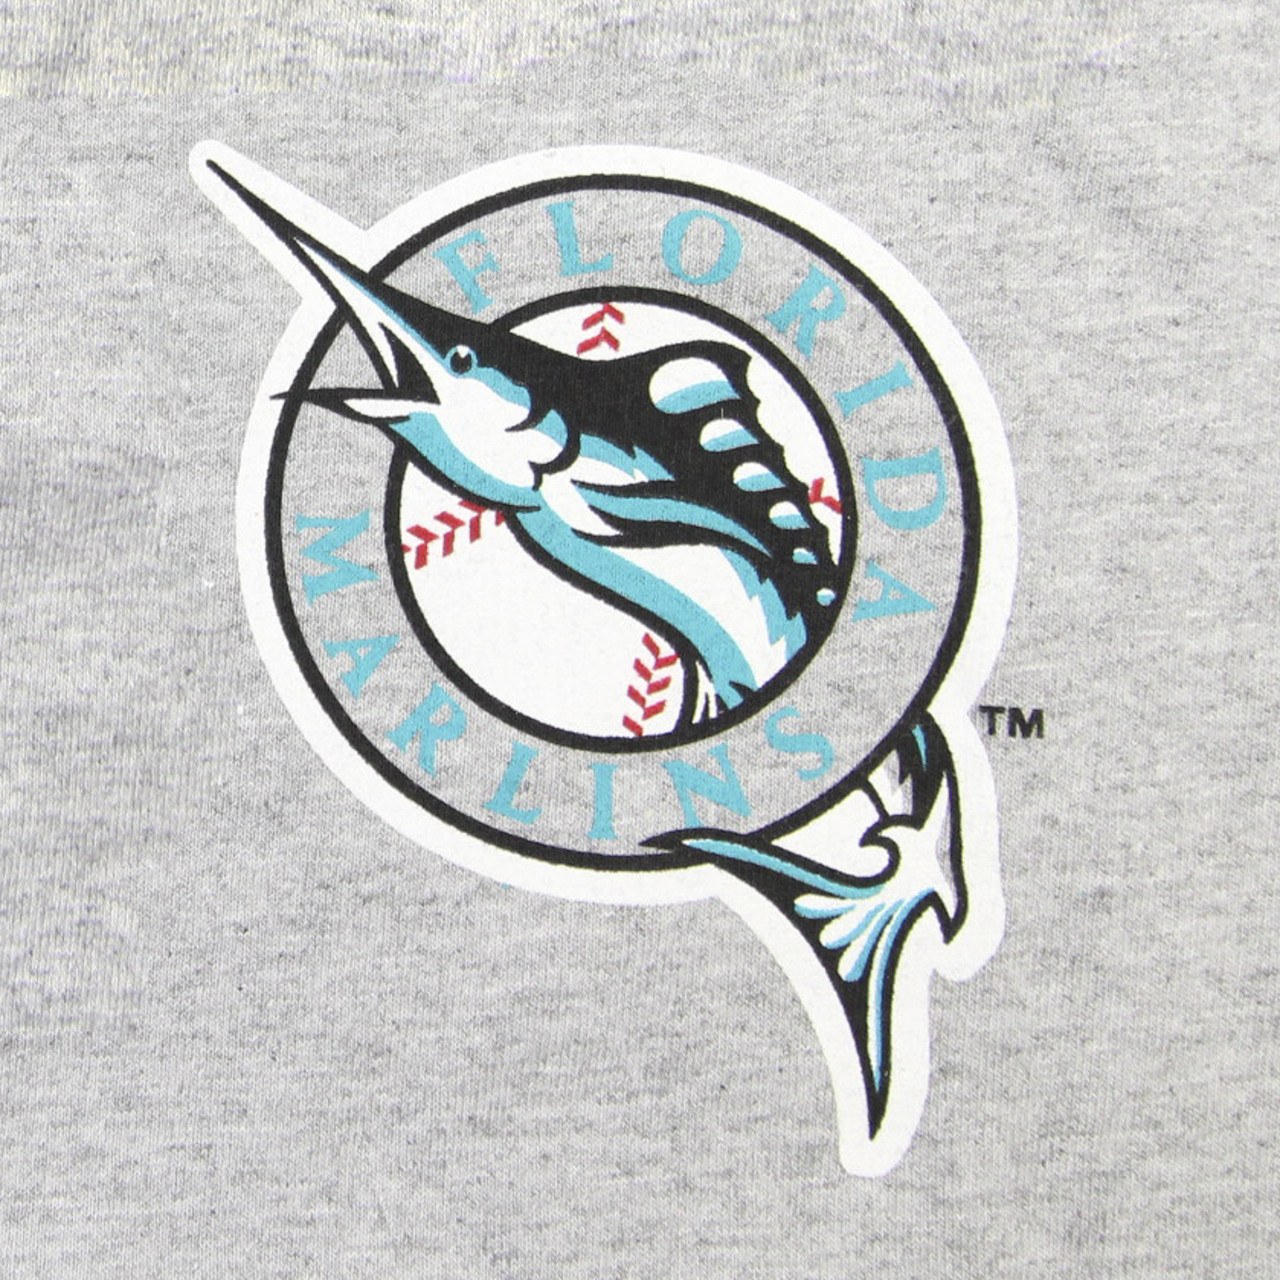 Florida Marlins Apparel  Clothing and Gear for Florida Marlins Fans